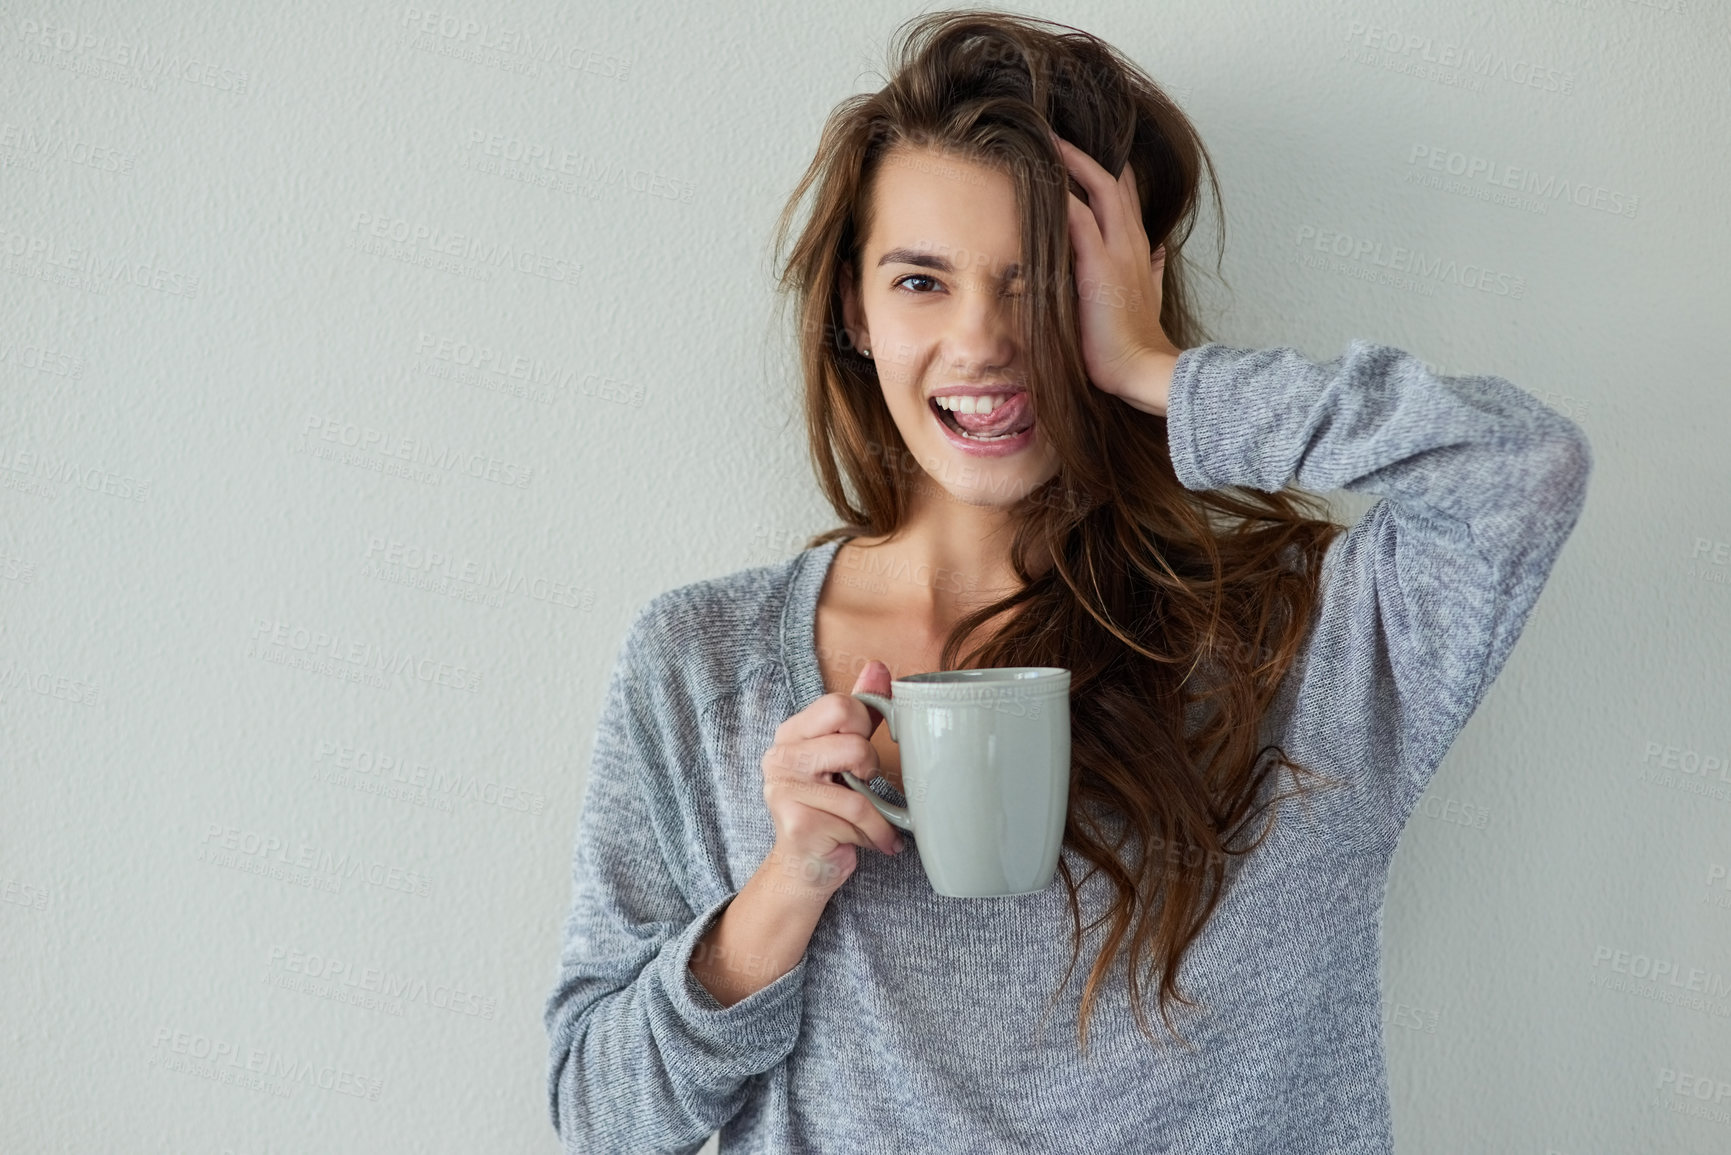 Buy stock photo Studio shot of an attractive young woman holding the side of her head while drinking coffee against a white background